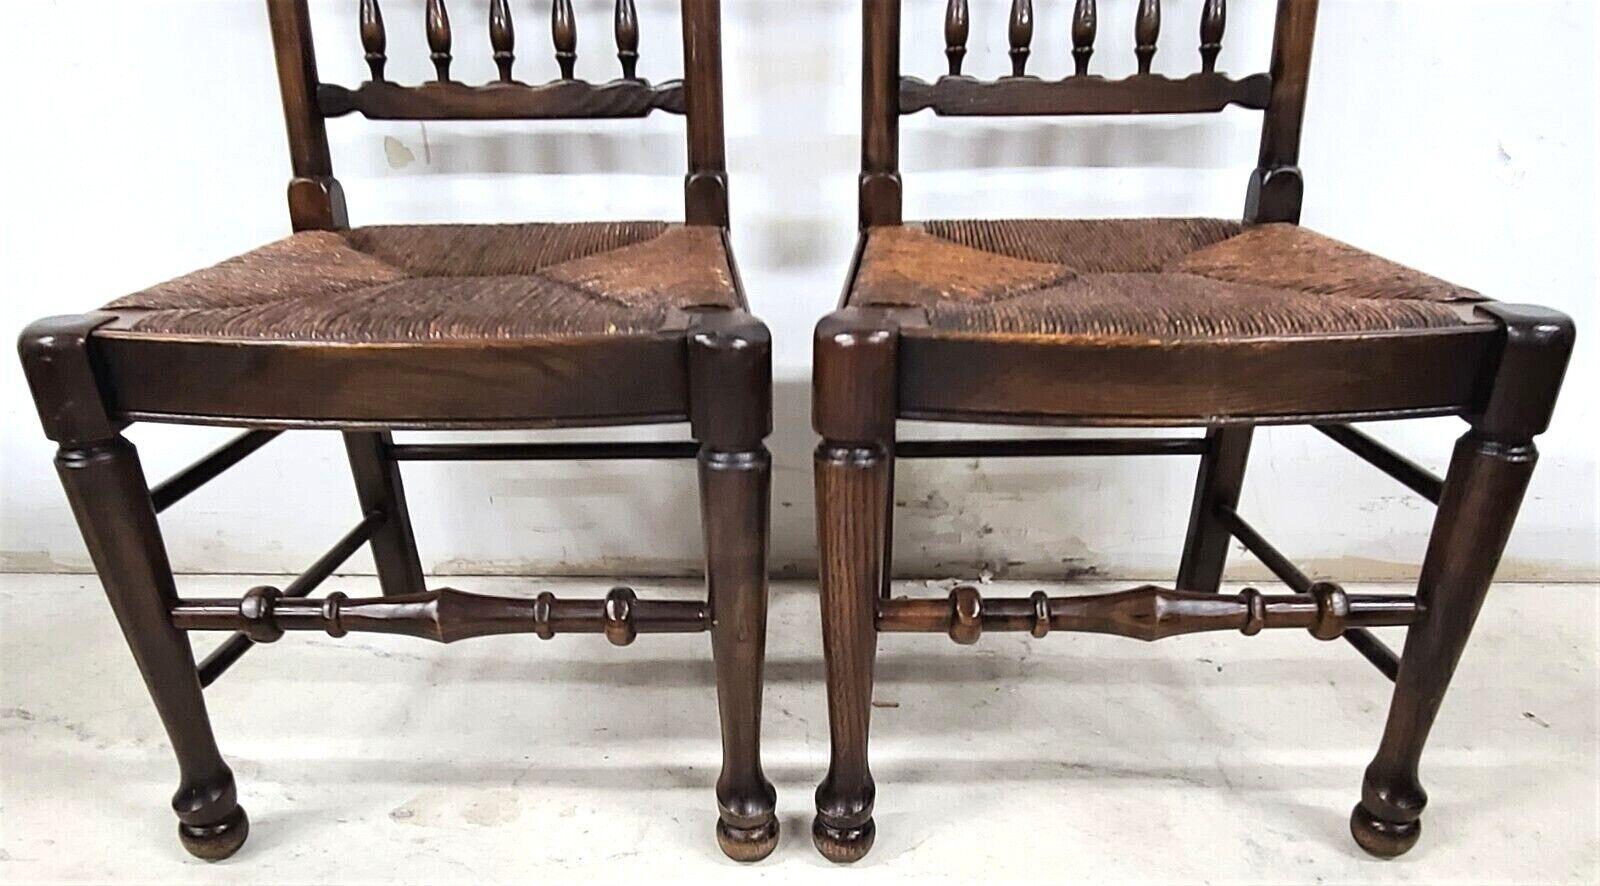 Country Lancashire Dining Chairs Antique English Oak Spindle Back Rush Seat - Set of 5